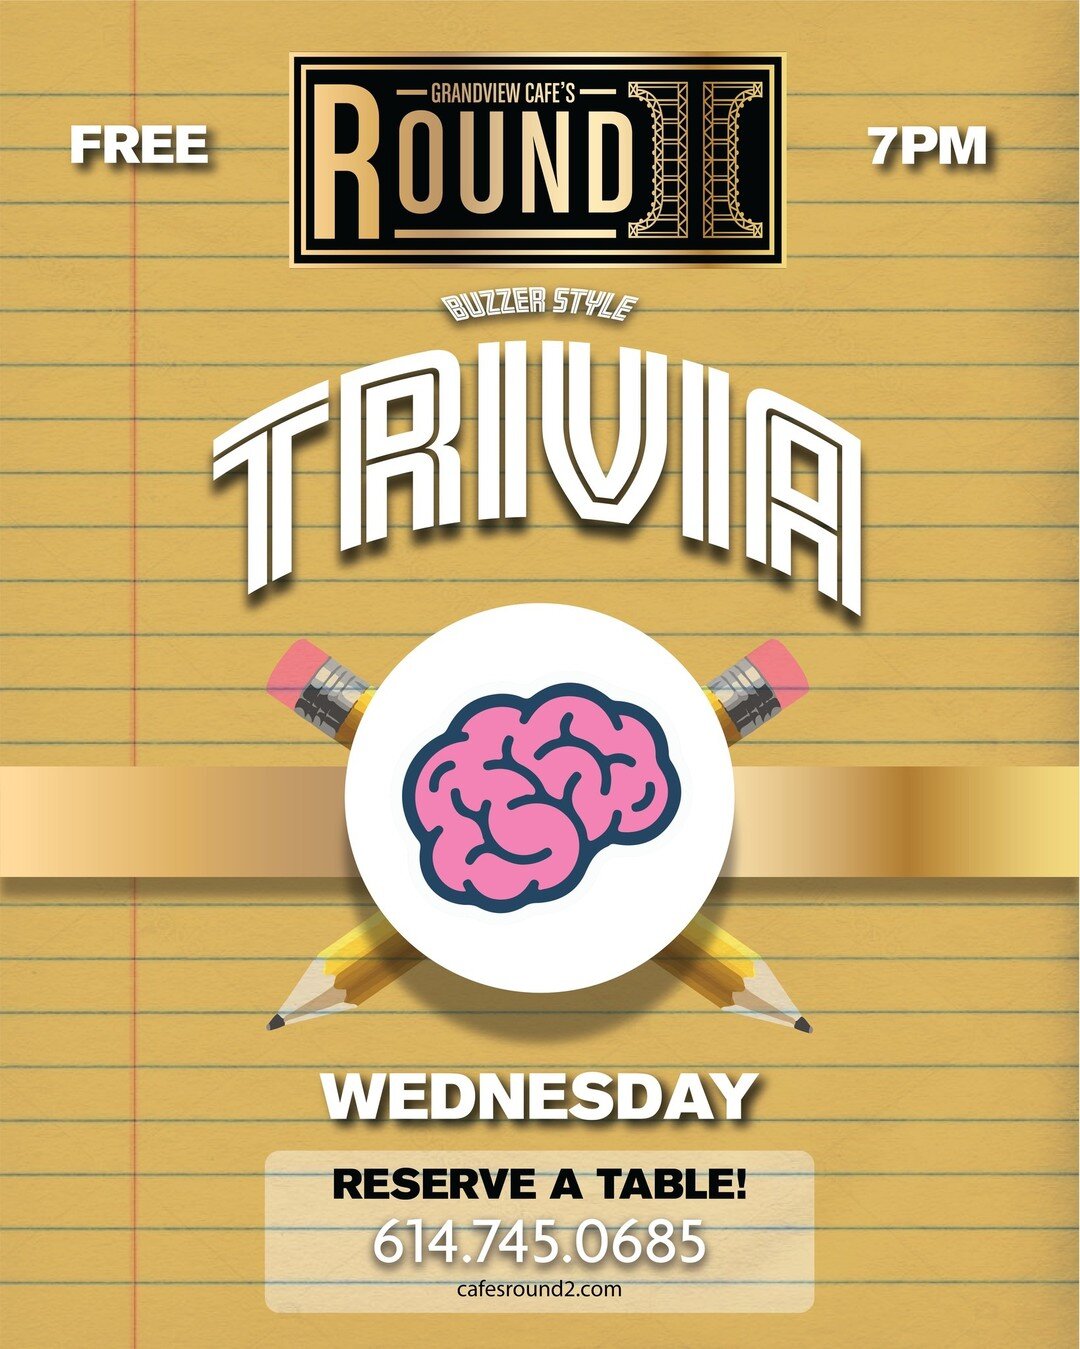 WEDNESDAY | Did you know that Cafe&rsquo;s Round II now has trivia on Wednesdays??? Starting at 7PM every Wednesday we&rsquo;ll be hosting buzzer style trivia brought to you by Excesss. Grab your thinking cap and reserve a table today - Don&rsquo;t d